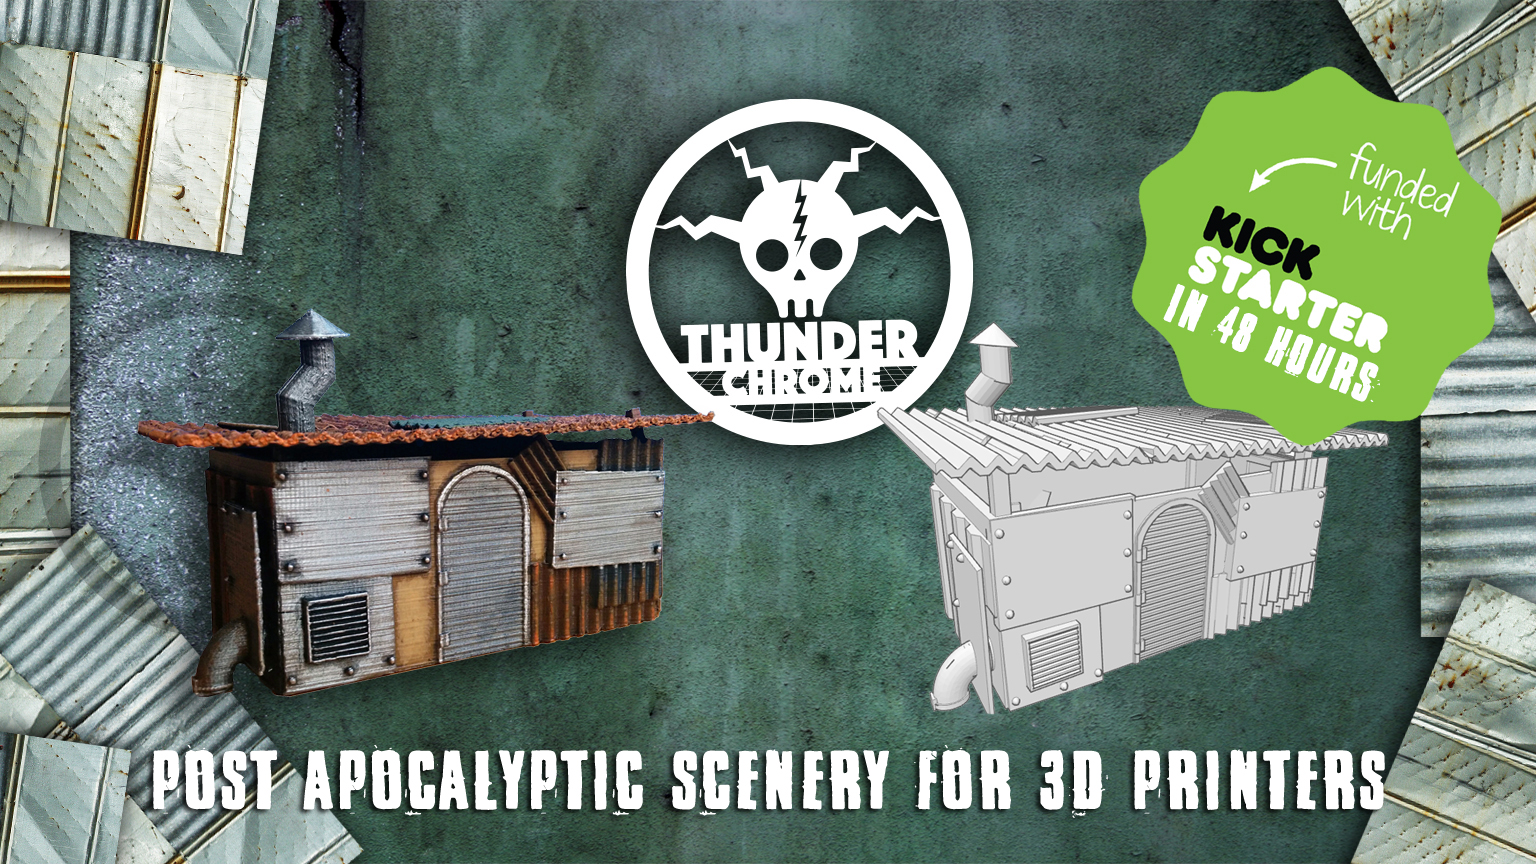 Thunder Chrome: post apocalyptic scenery for 3D printers